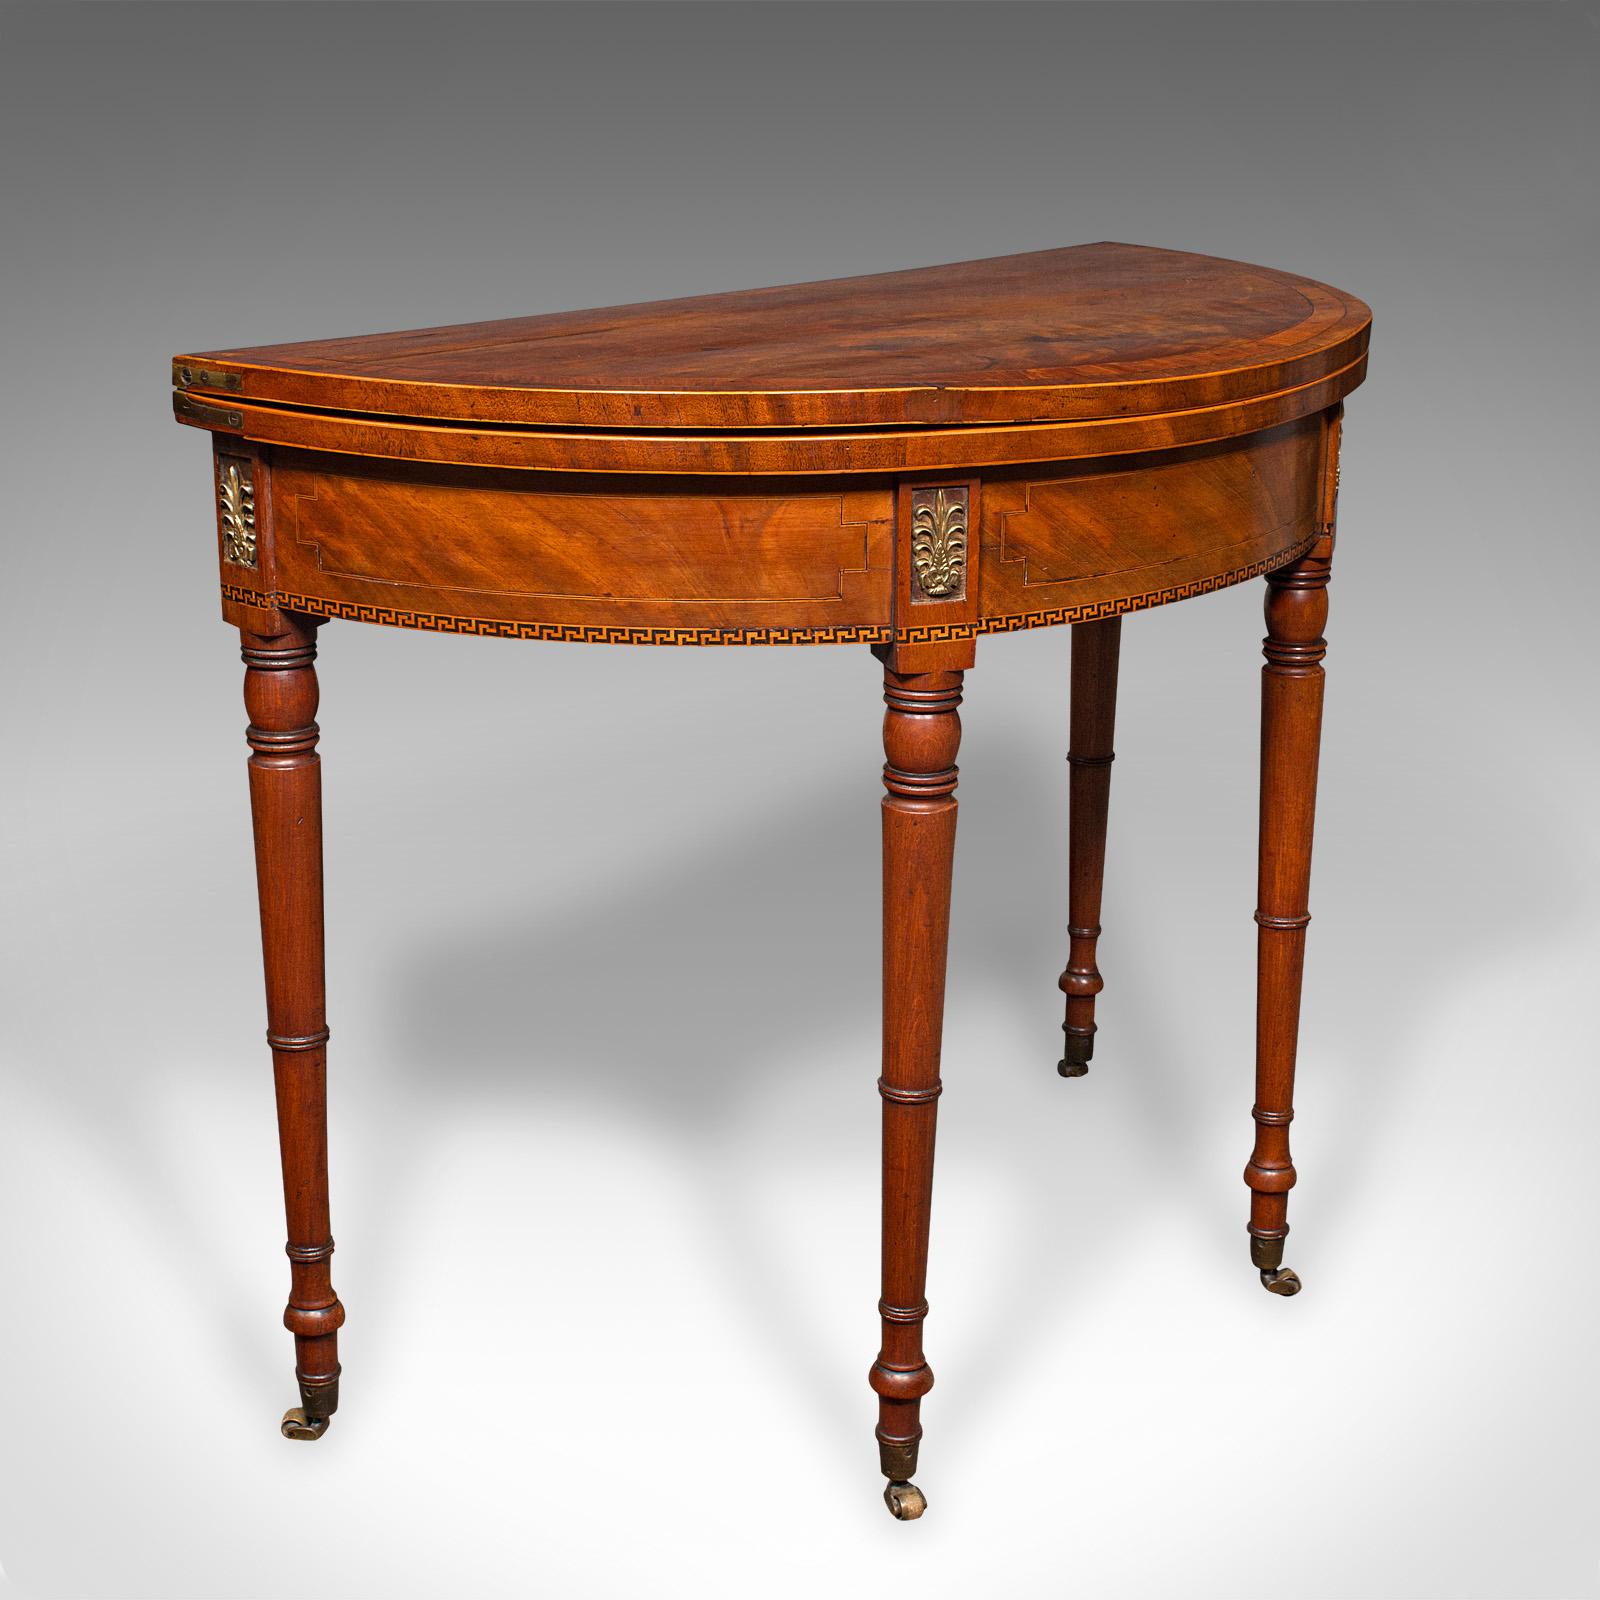 This is an antique demi-lune table. An English, walnut and satinwood fold over card table, dating to the Georgian period, circa 1800.

Beautiful Georgian craftsmanship for the finest gentleman's lounge
Displaying a desirable aged patina and in